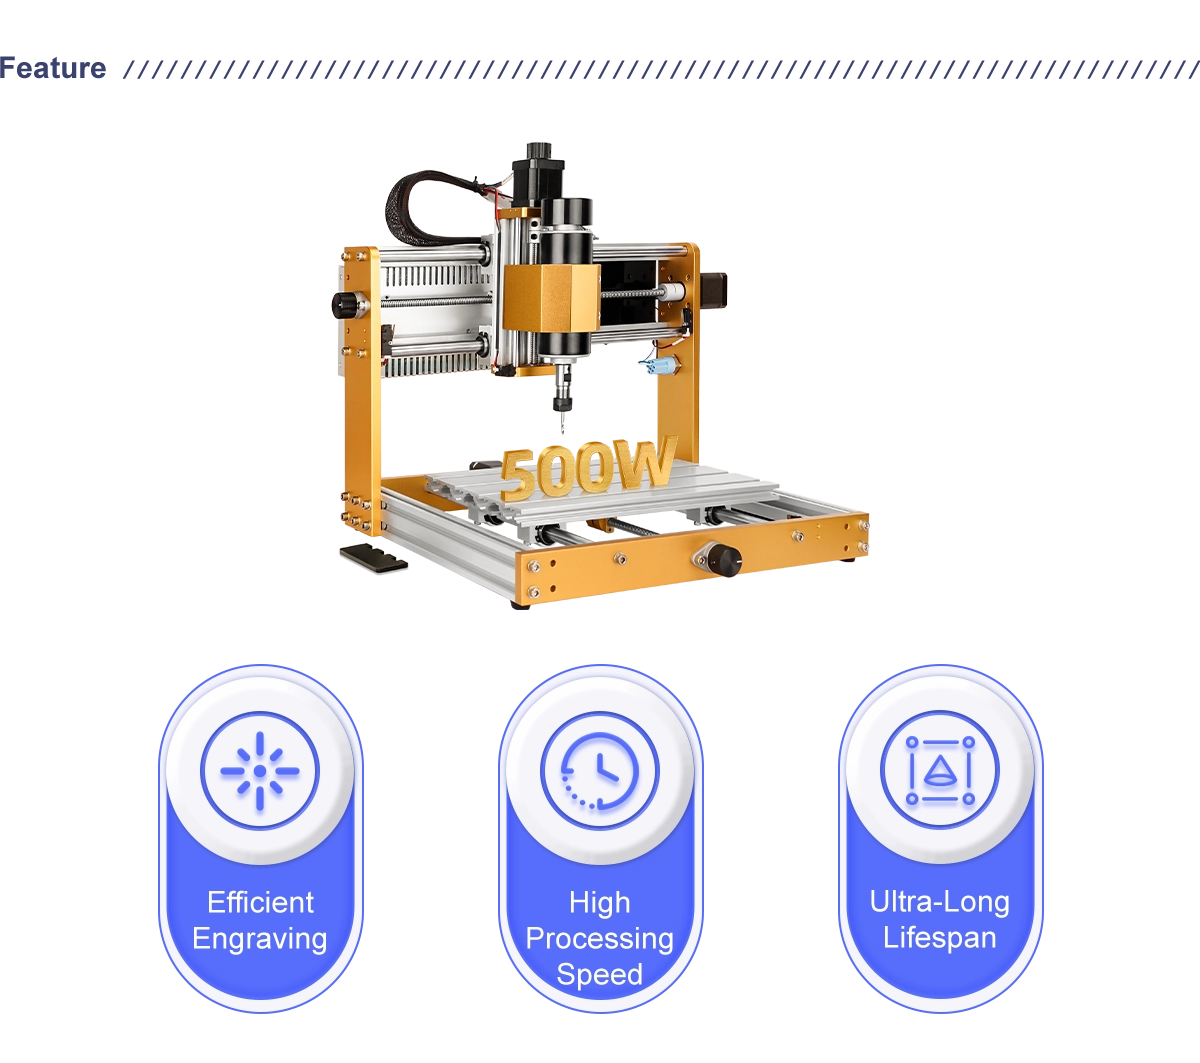 Desktop CNC 3018 Plus 2.0 engraving Router Machine With 500w Spindle